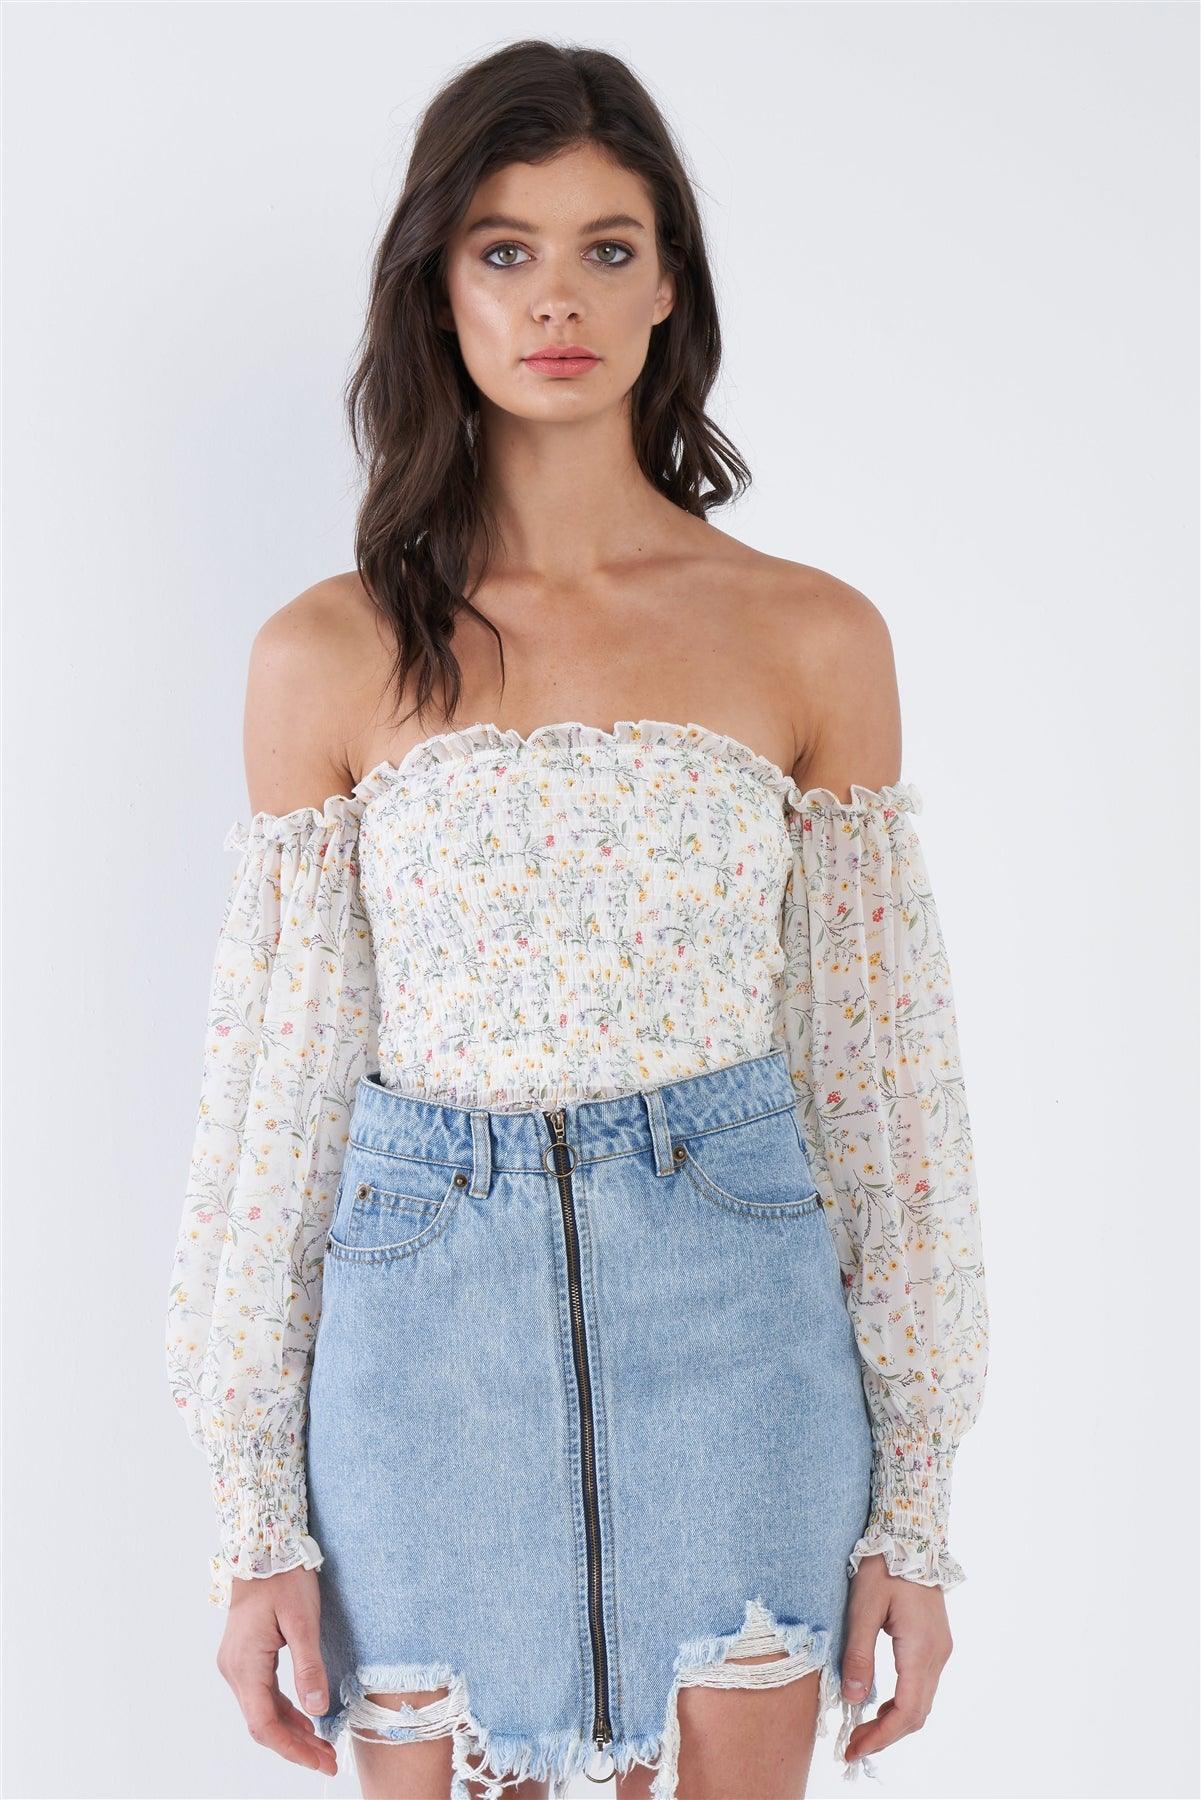 Off-White Sheer Floral Off-The-Shoulder Peplum Top /1-1-1